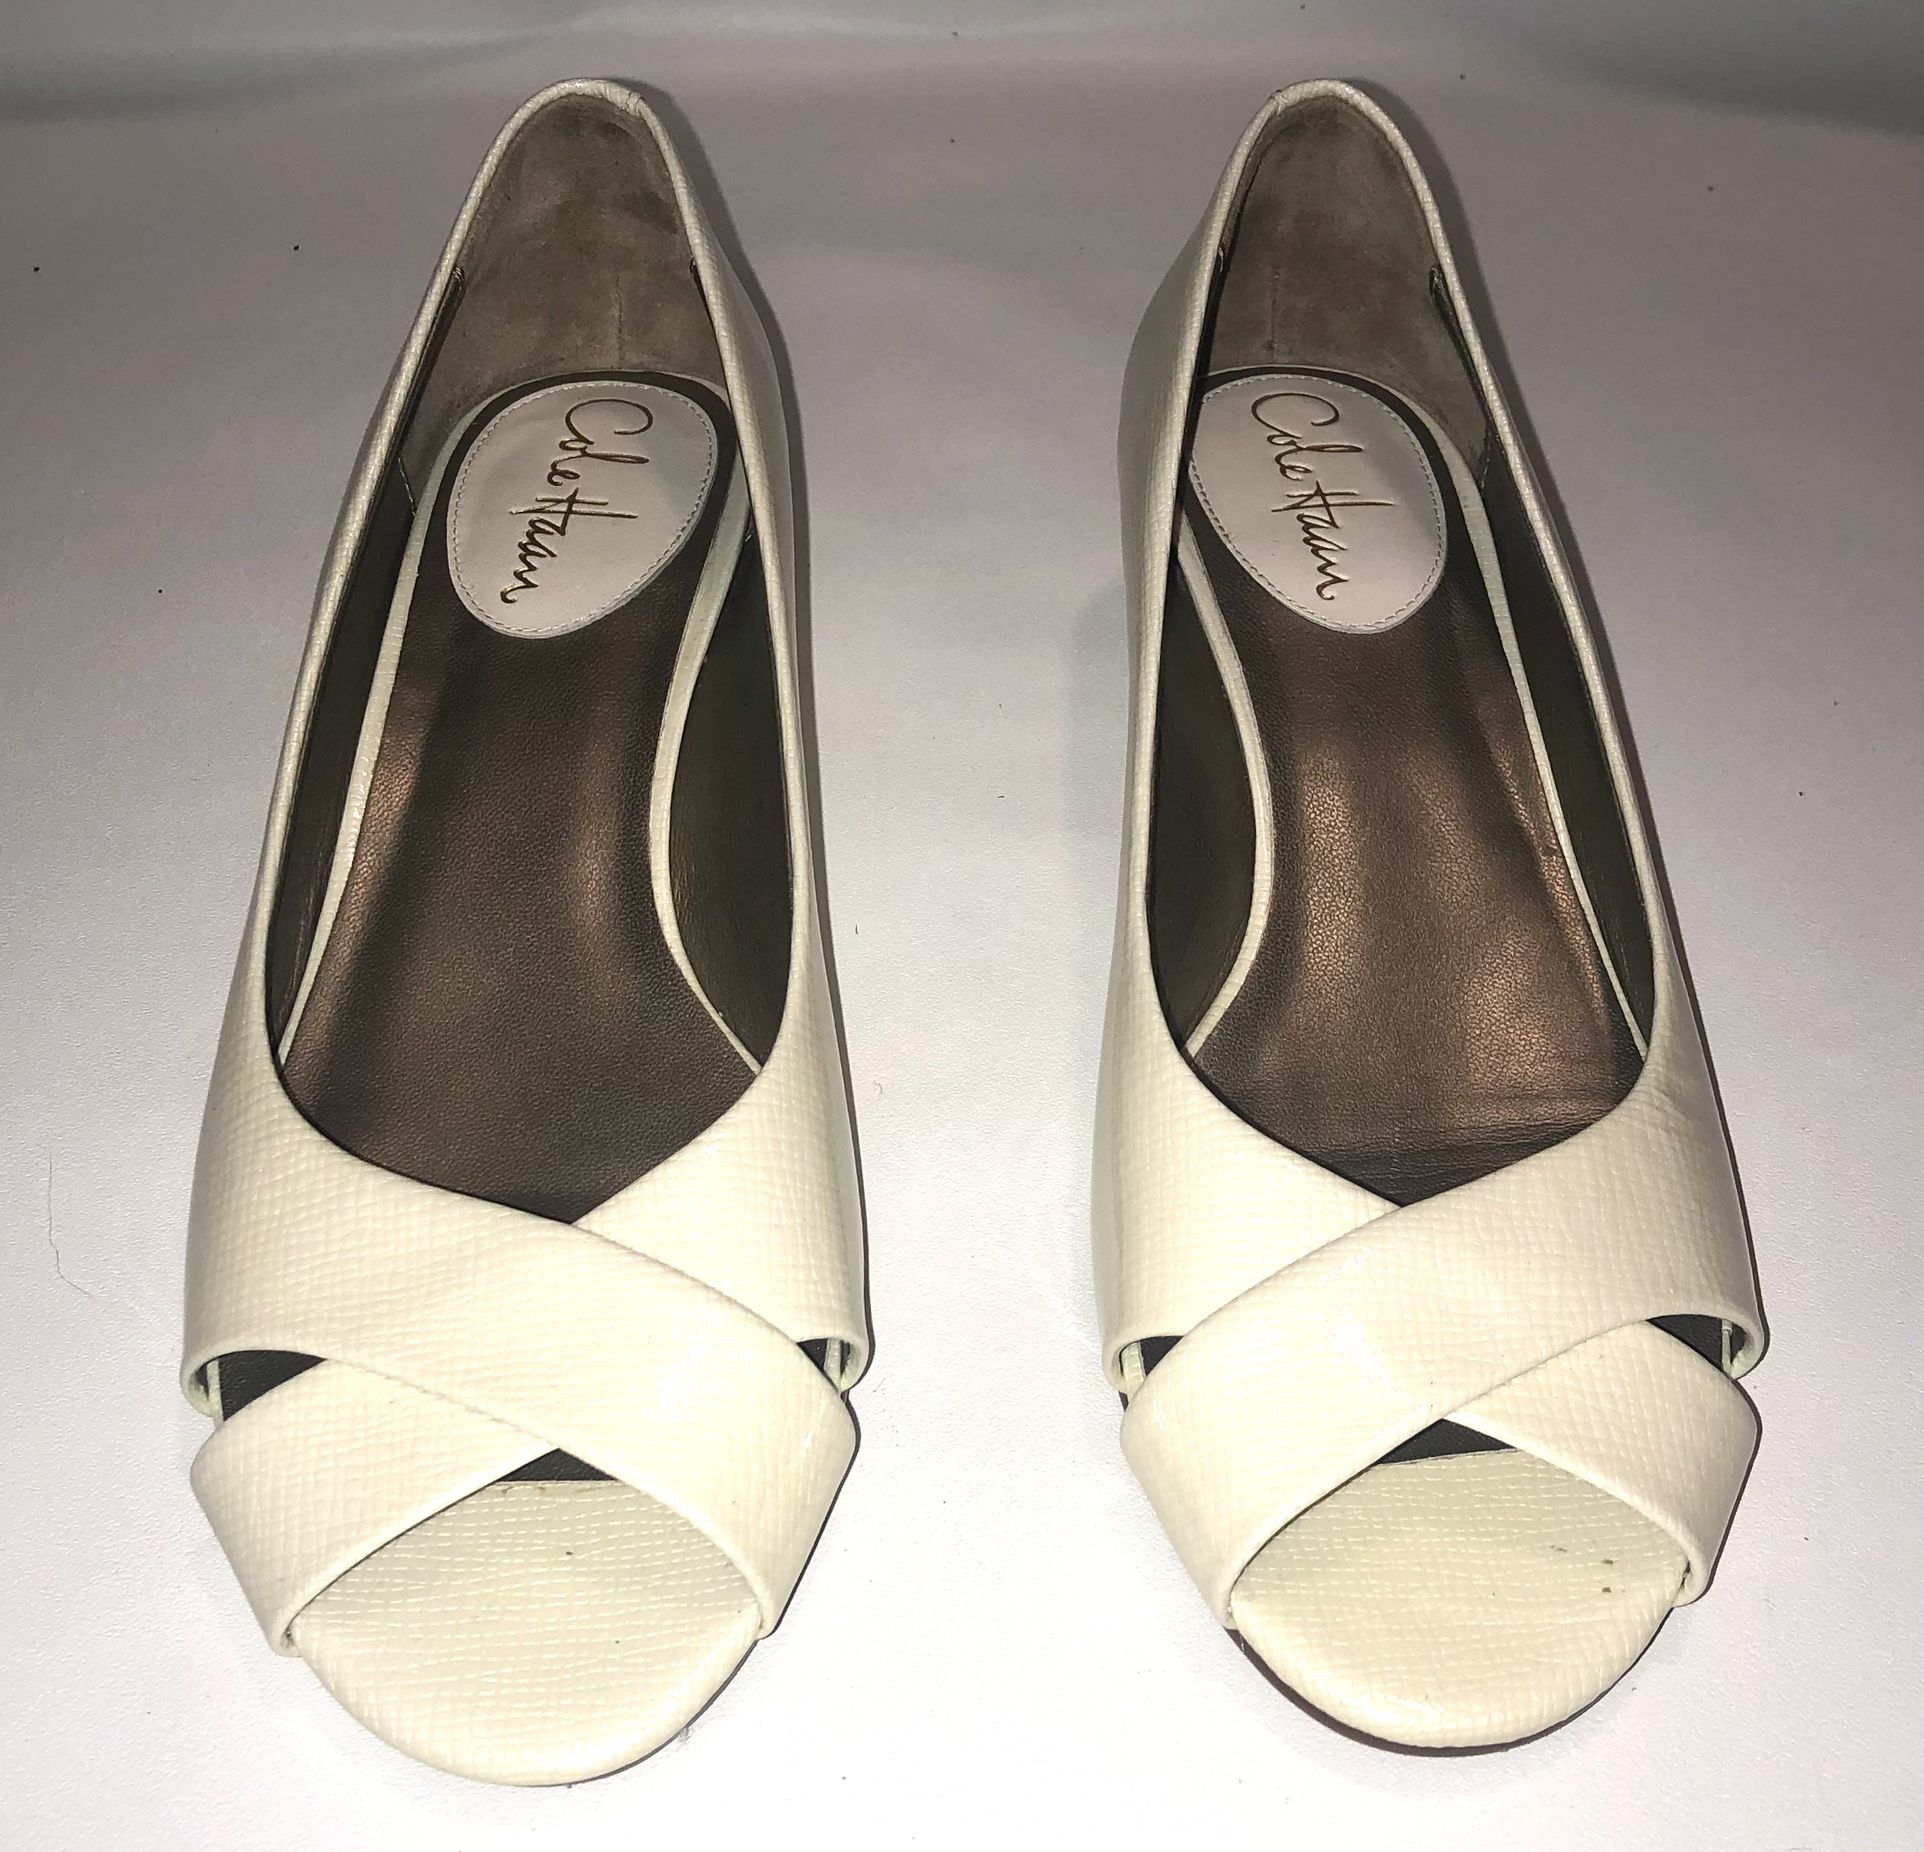 New Women’s Cole Haan Air Elly Pump 7.5  Ivory Patent Criss Cross Peep Toe Wedge